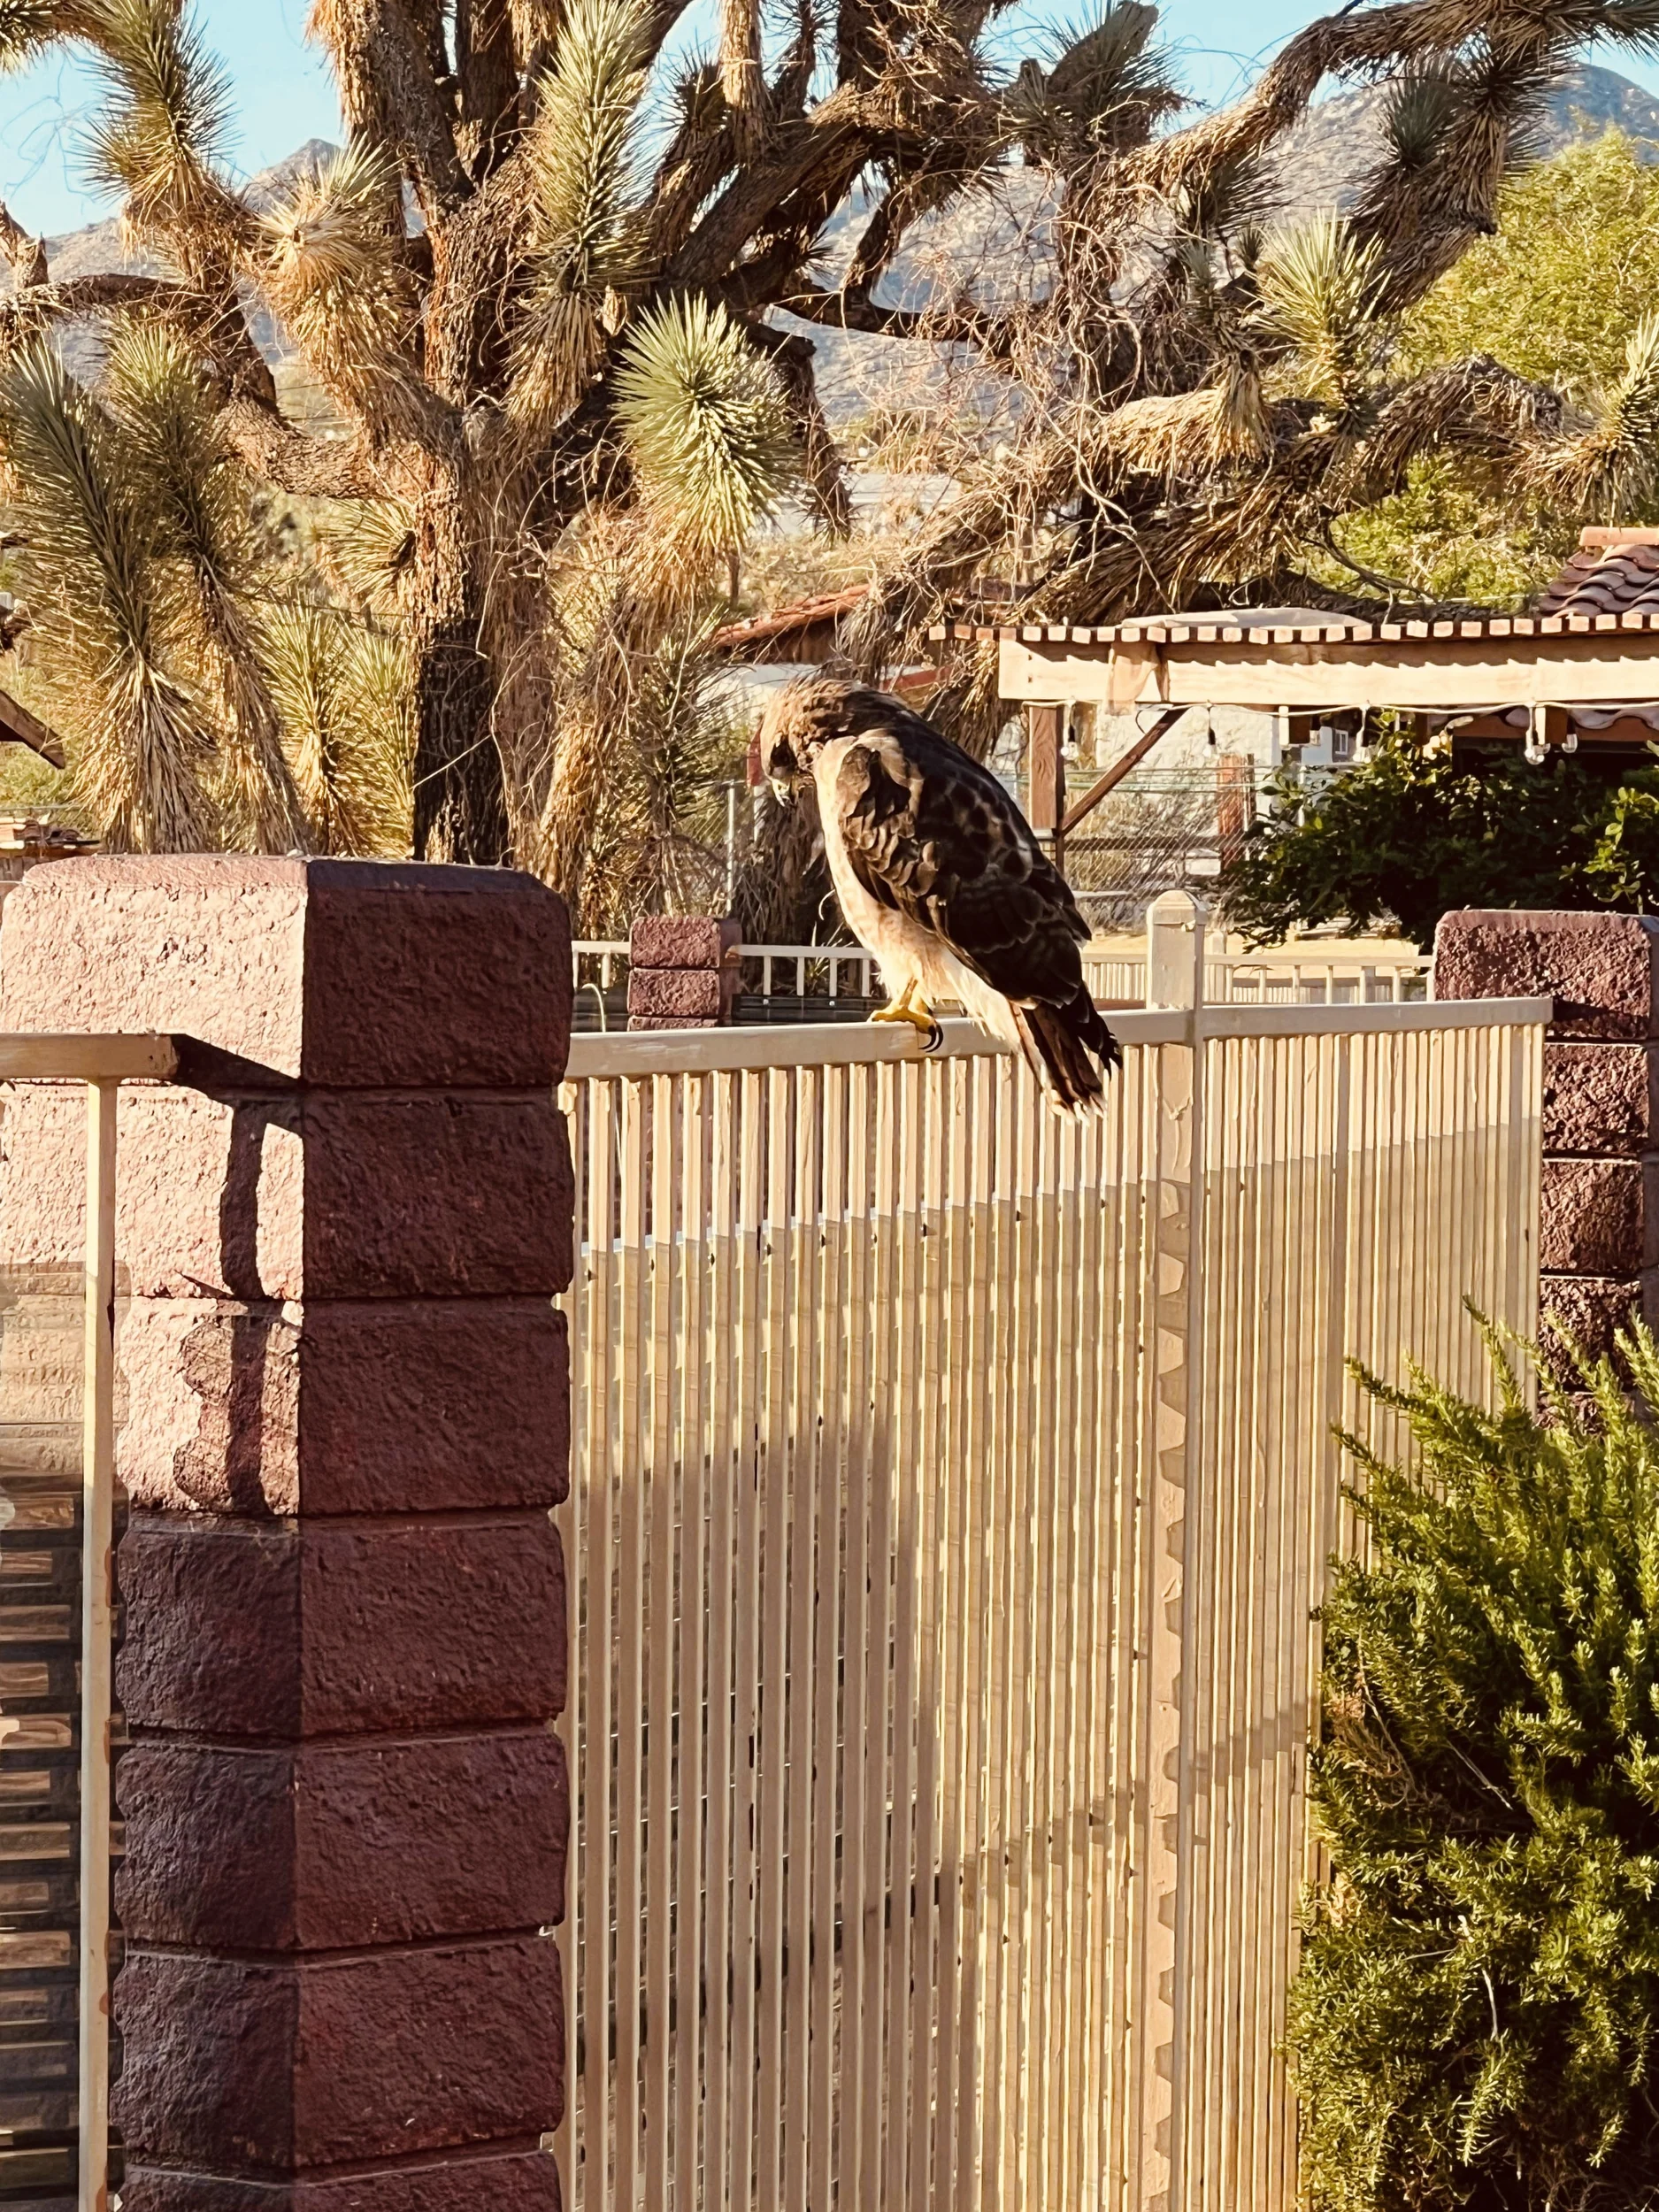 A red tail hawk on a pool fence with a red post. .